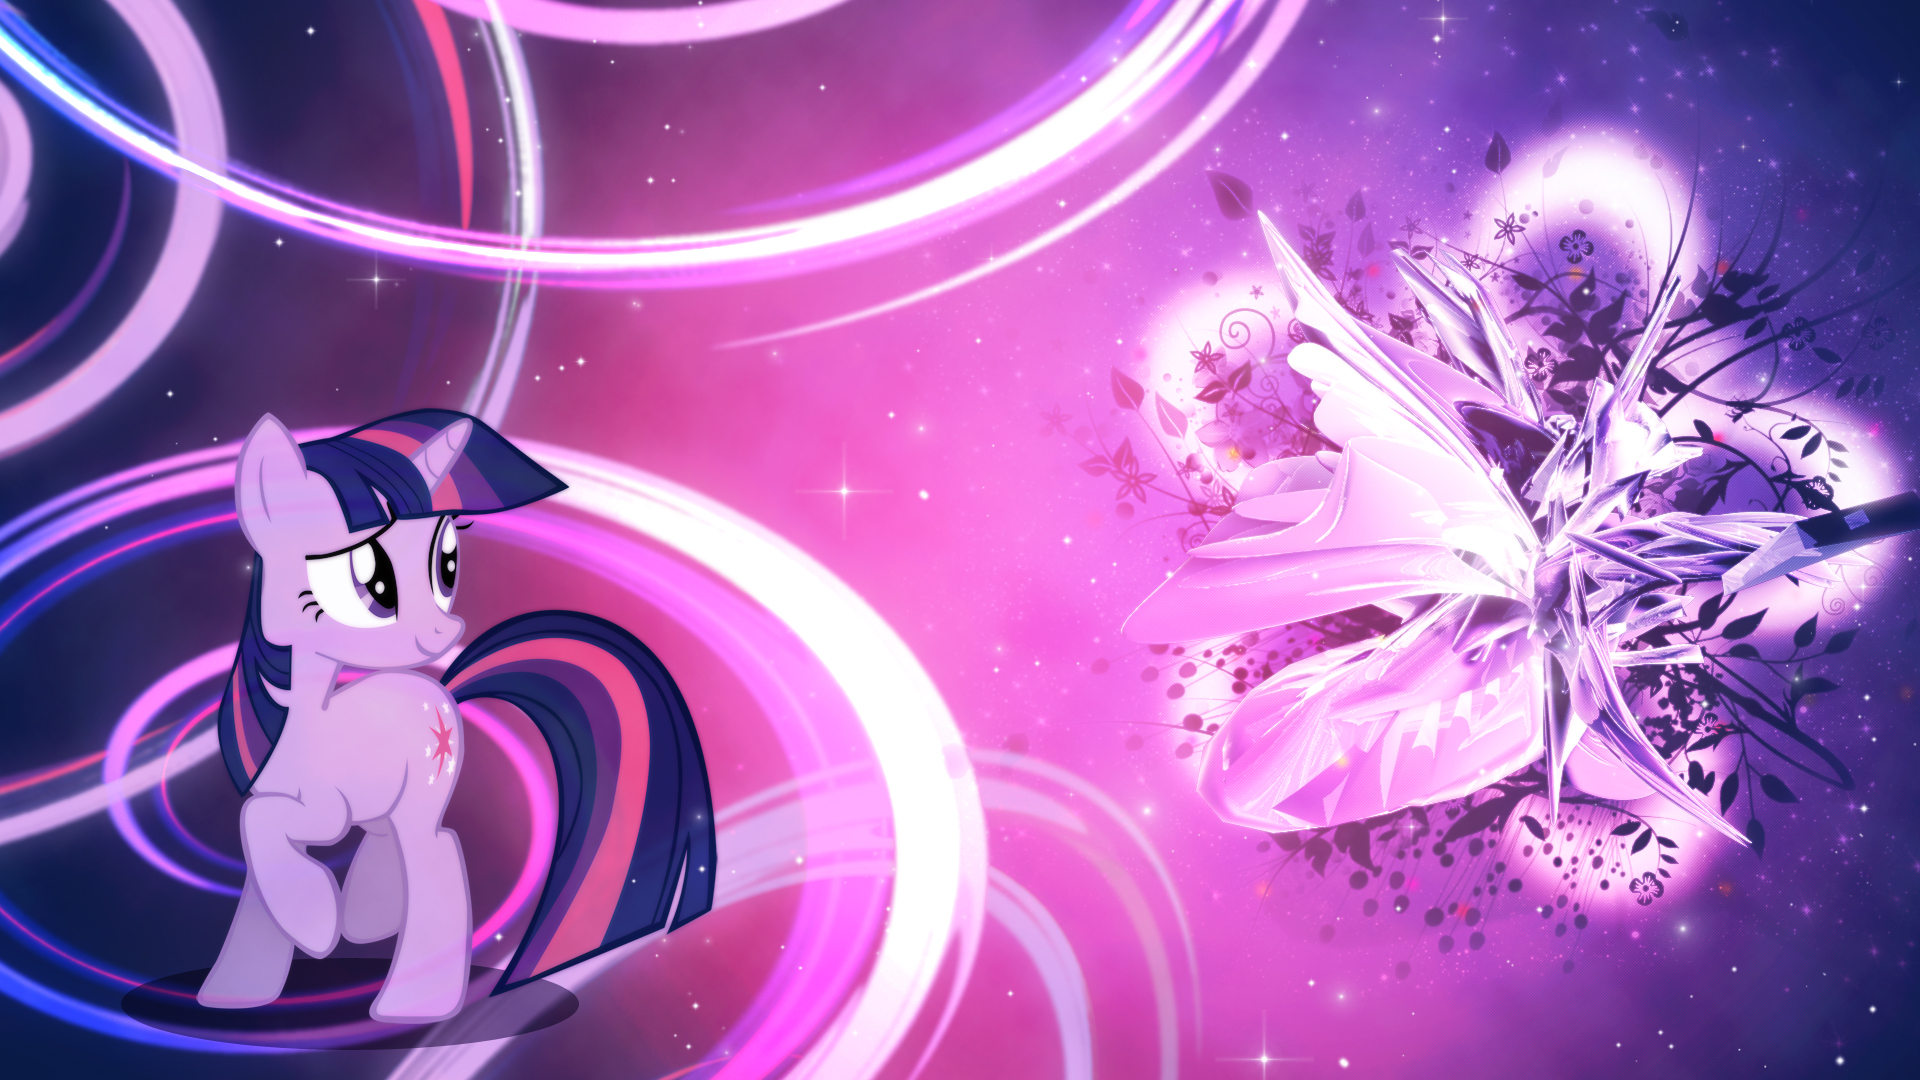 Twilight Sparkle - Magic Flower Wallpaper by AncientKale and Unfiltered-N